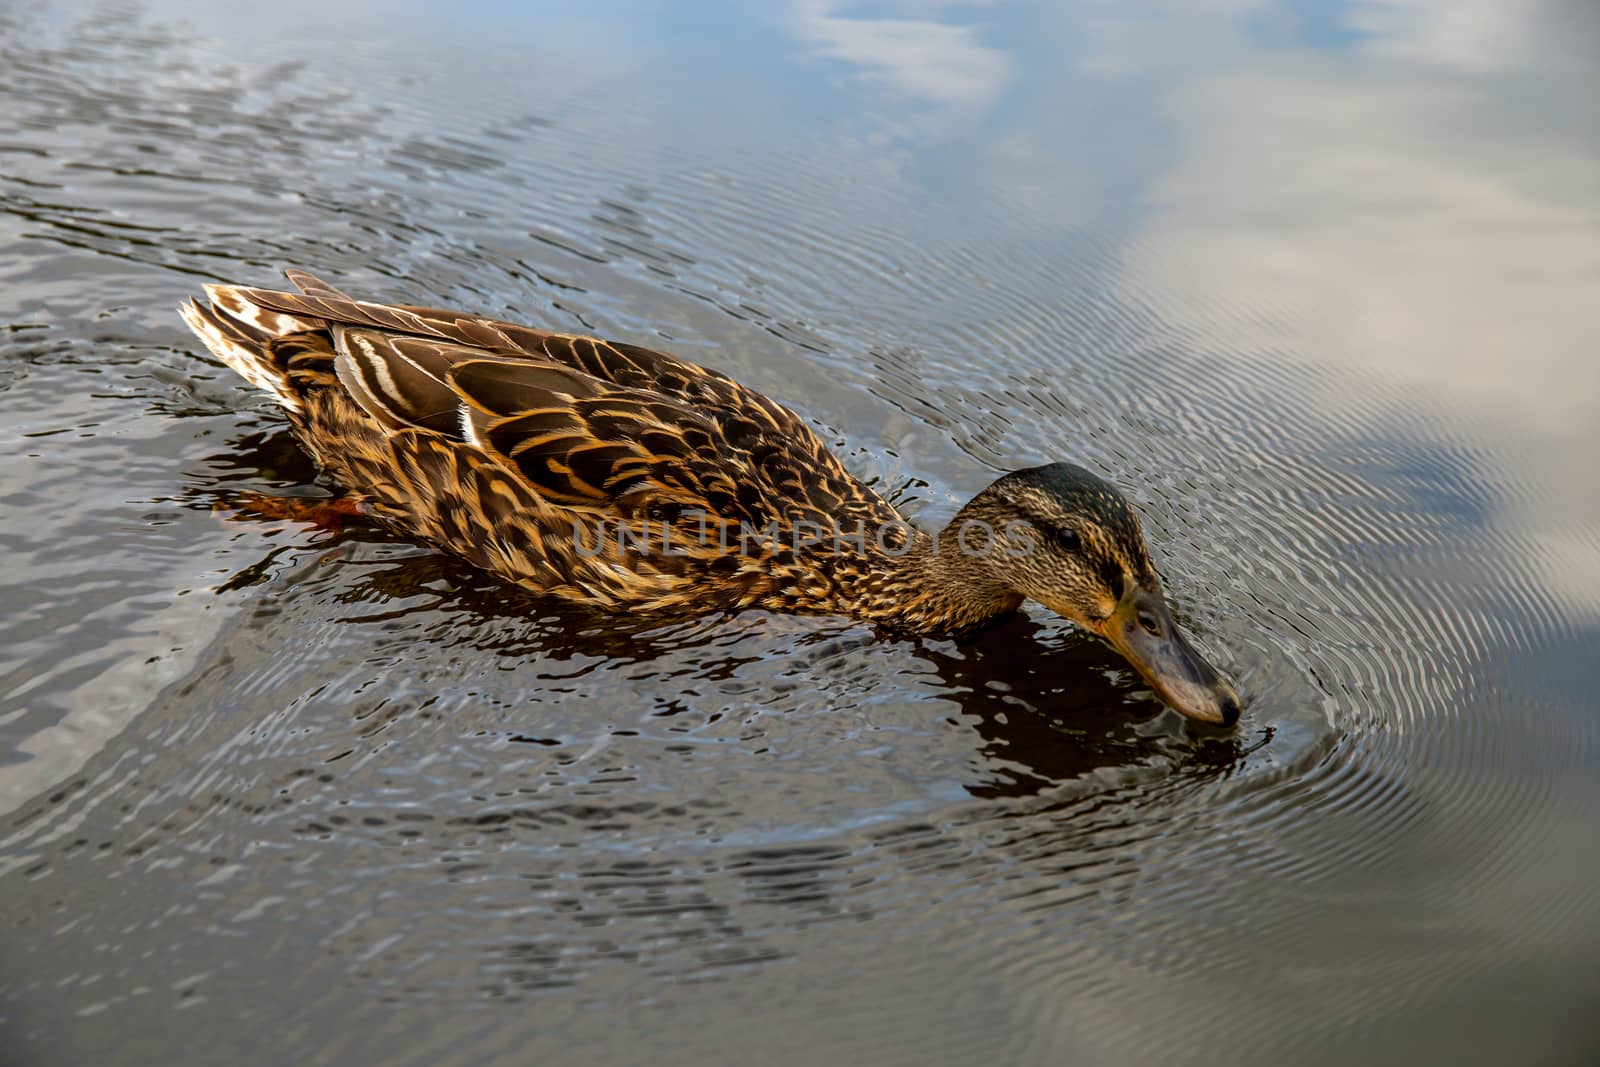 Duck swimming in the river Gauja. Duck on coast of river Gauja in Latvia. Duck is a waterbird with a broad blunt bill, short legs, webbed feet, and a waddling gait.